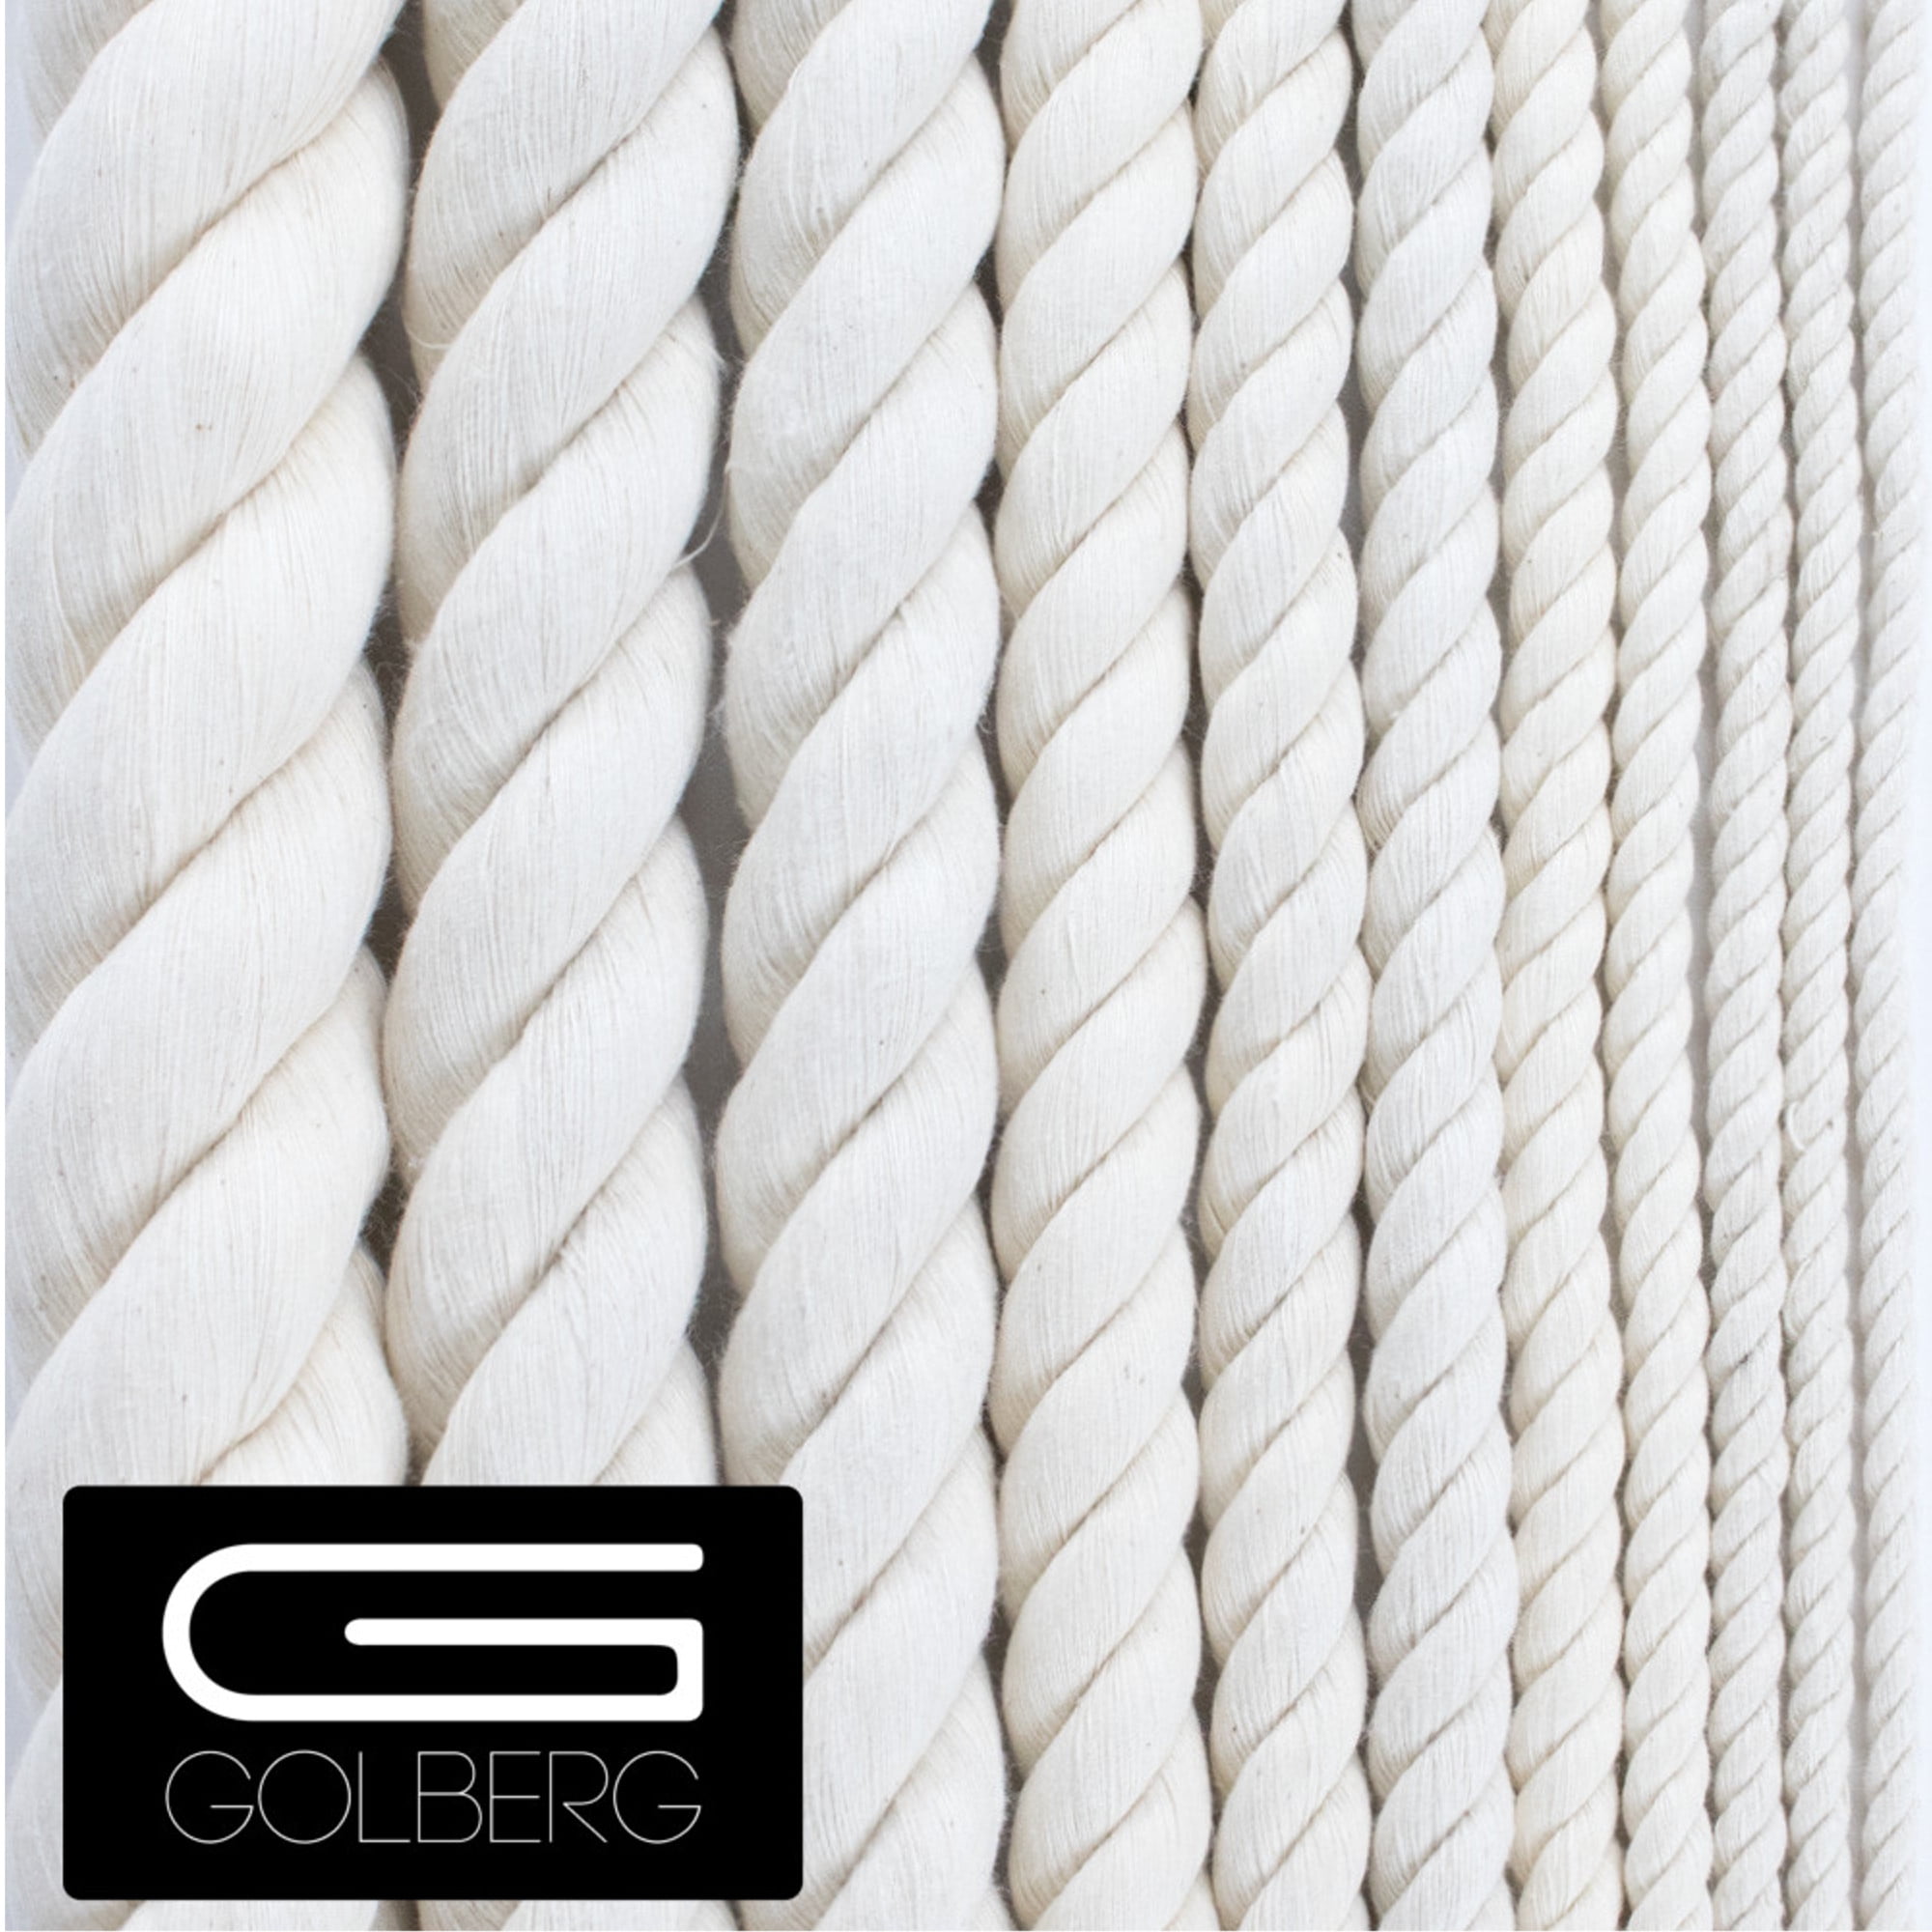 Golberg White Natural Cotton Rope 1 Inch Diameter Twisted 100 Pure Natural Cotton Rope